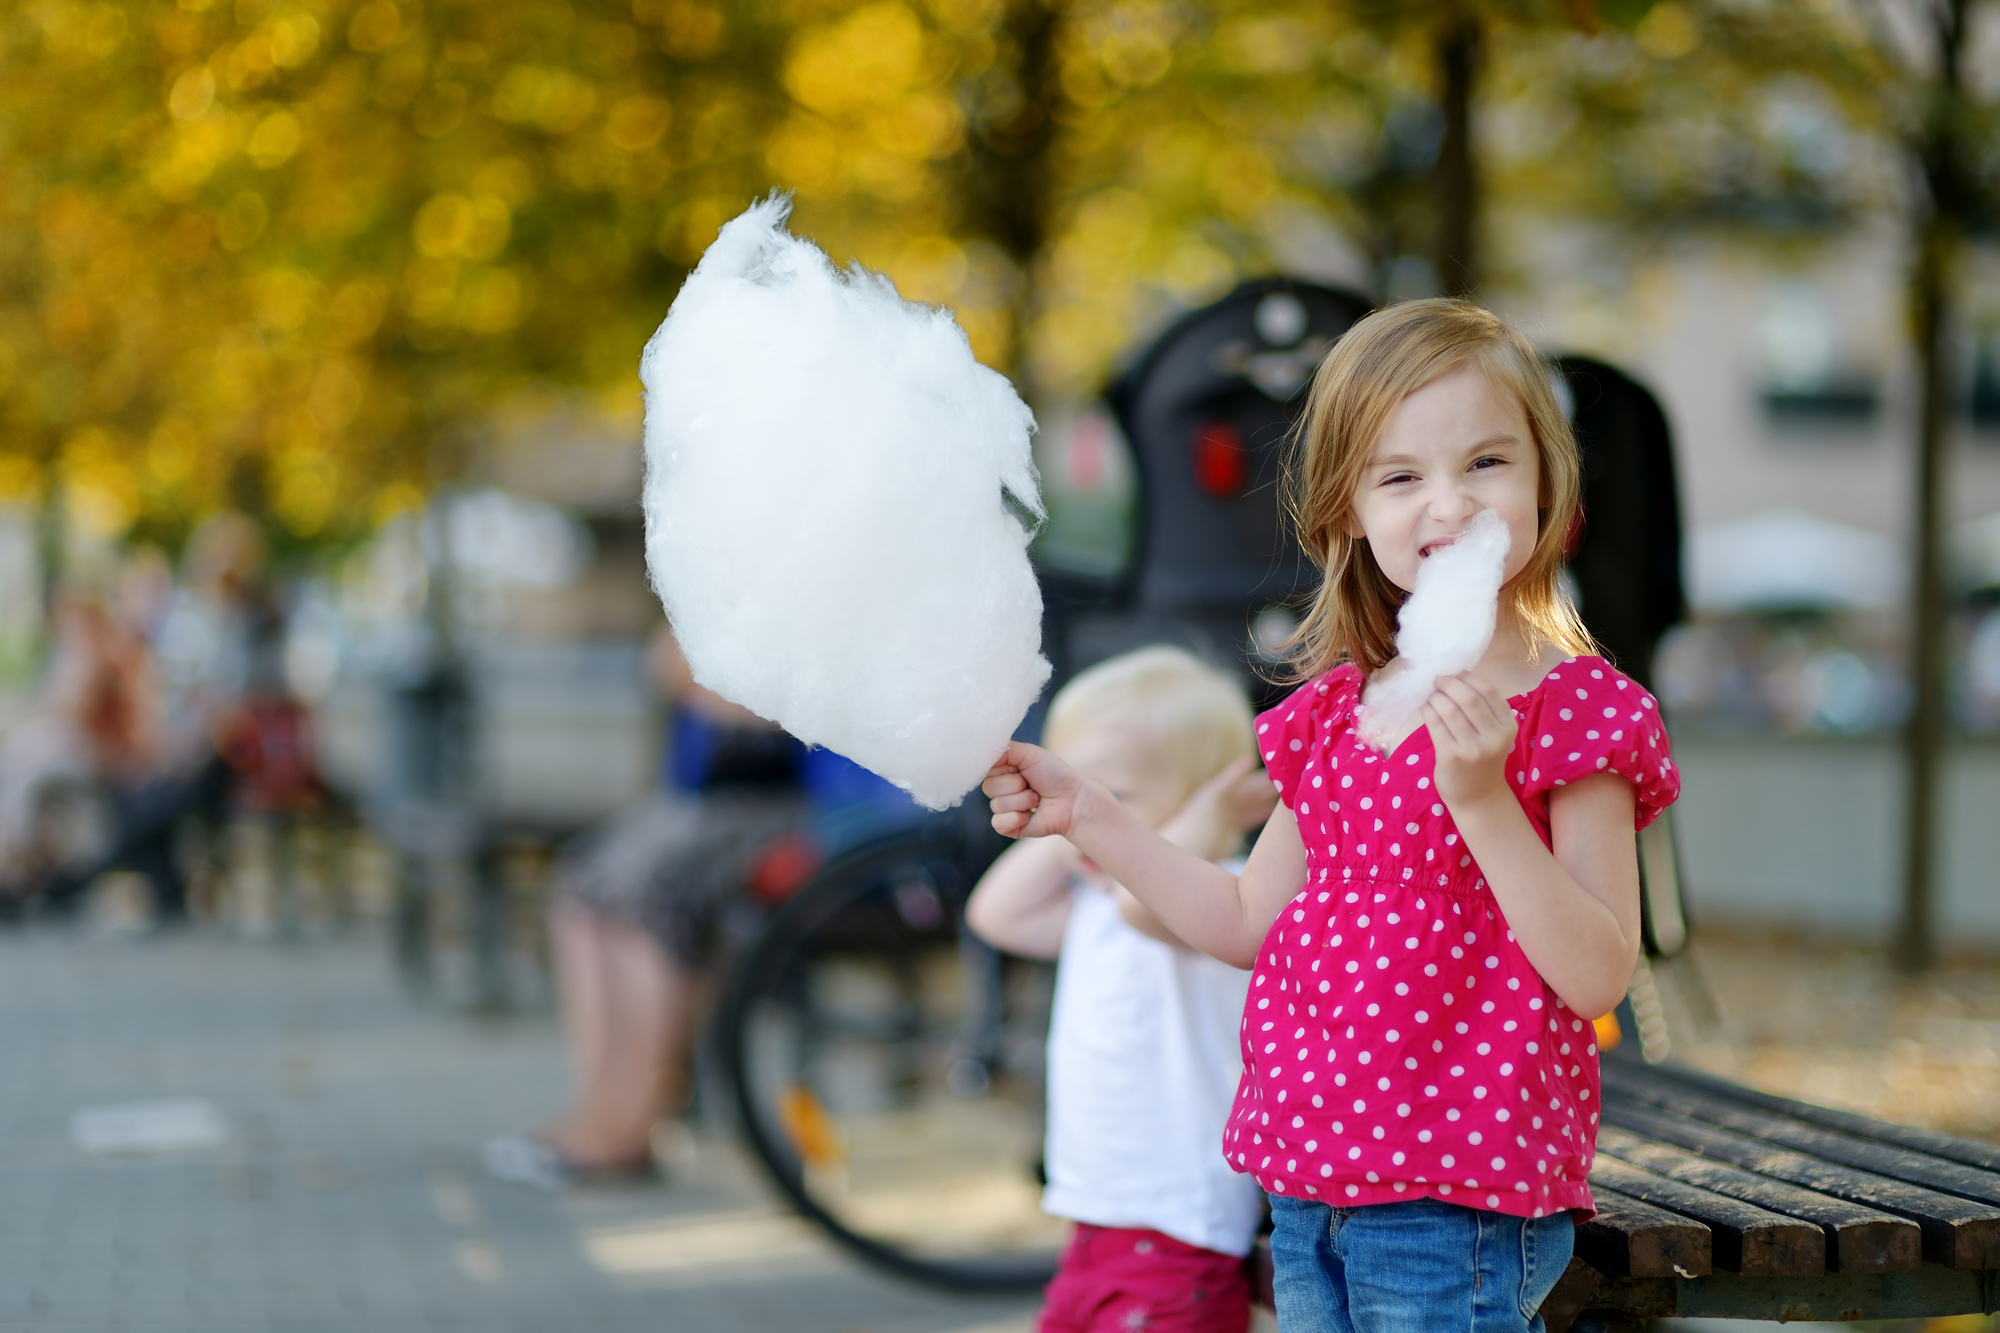 Adorable little girl eating candy-floss outdoors